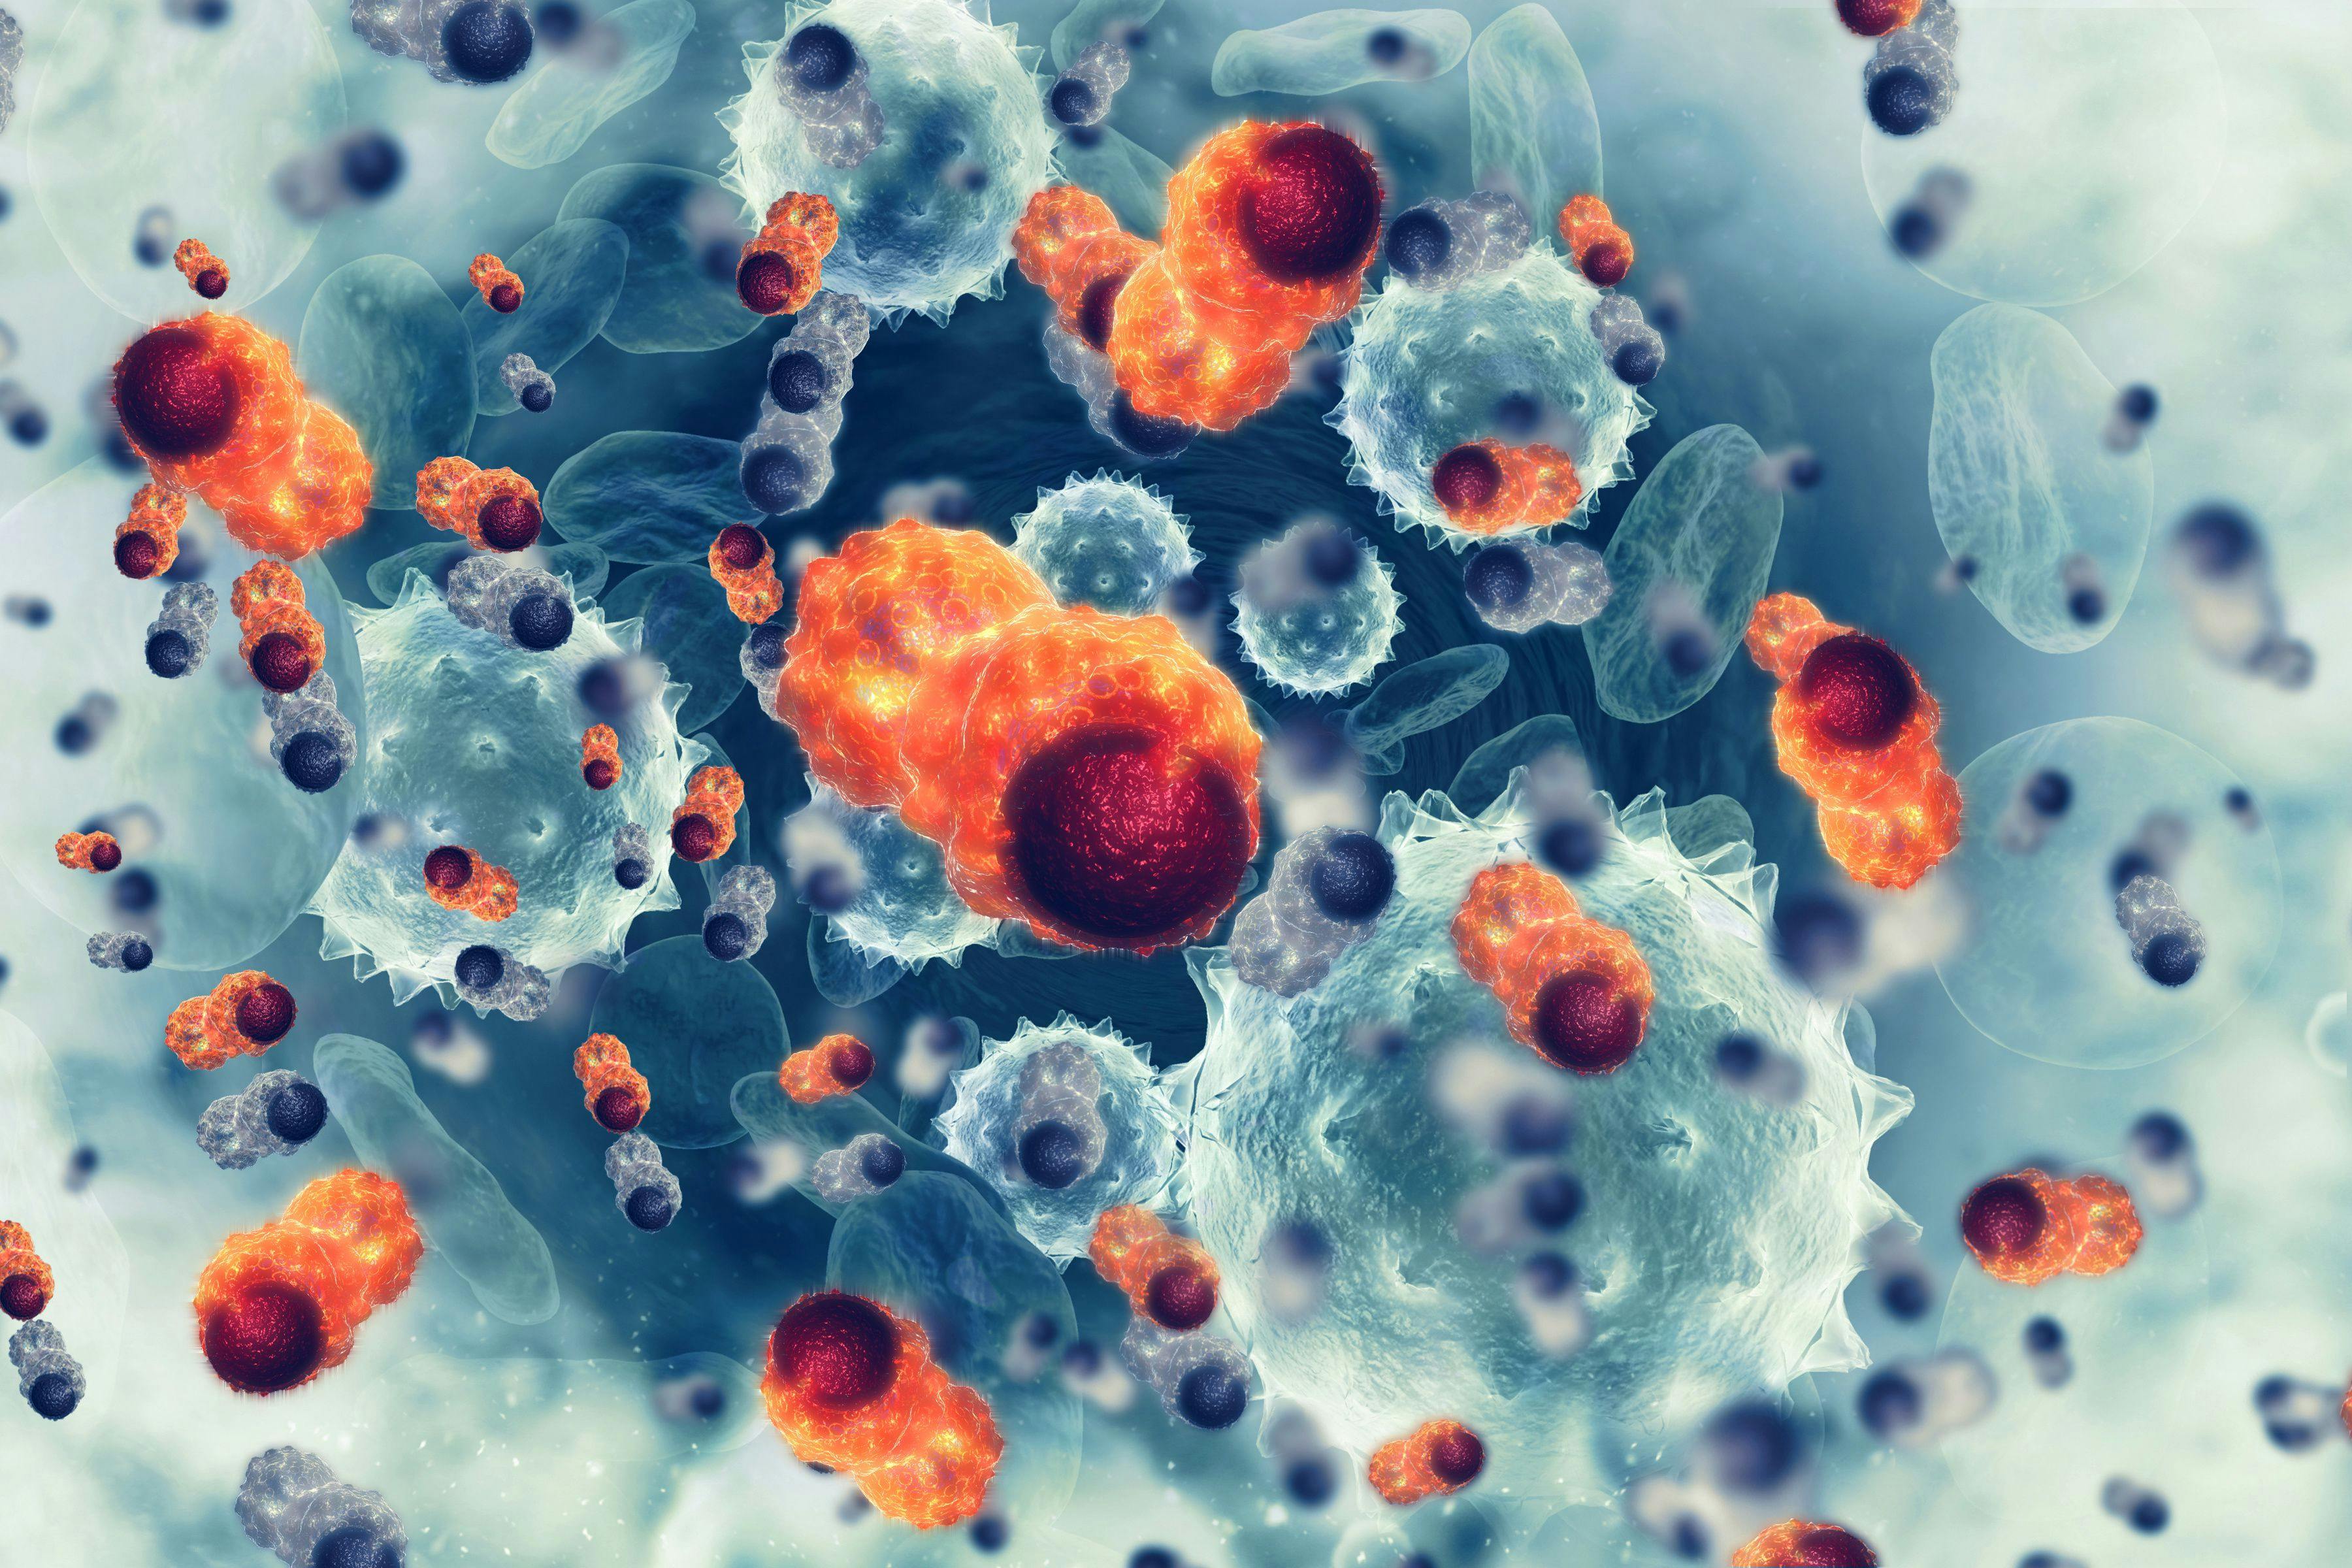 European Commission Approves Pembrolizumab in MSI-H/dMMR Solid Tumors